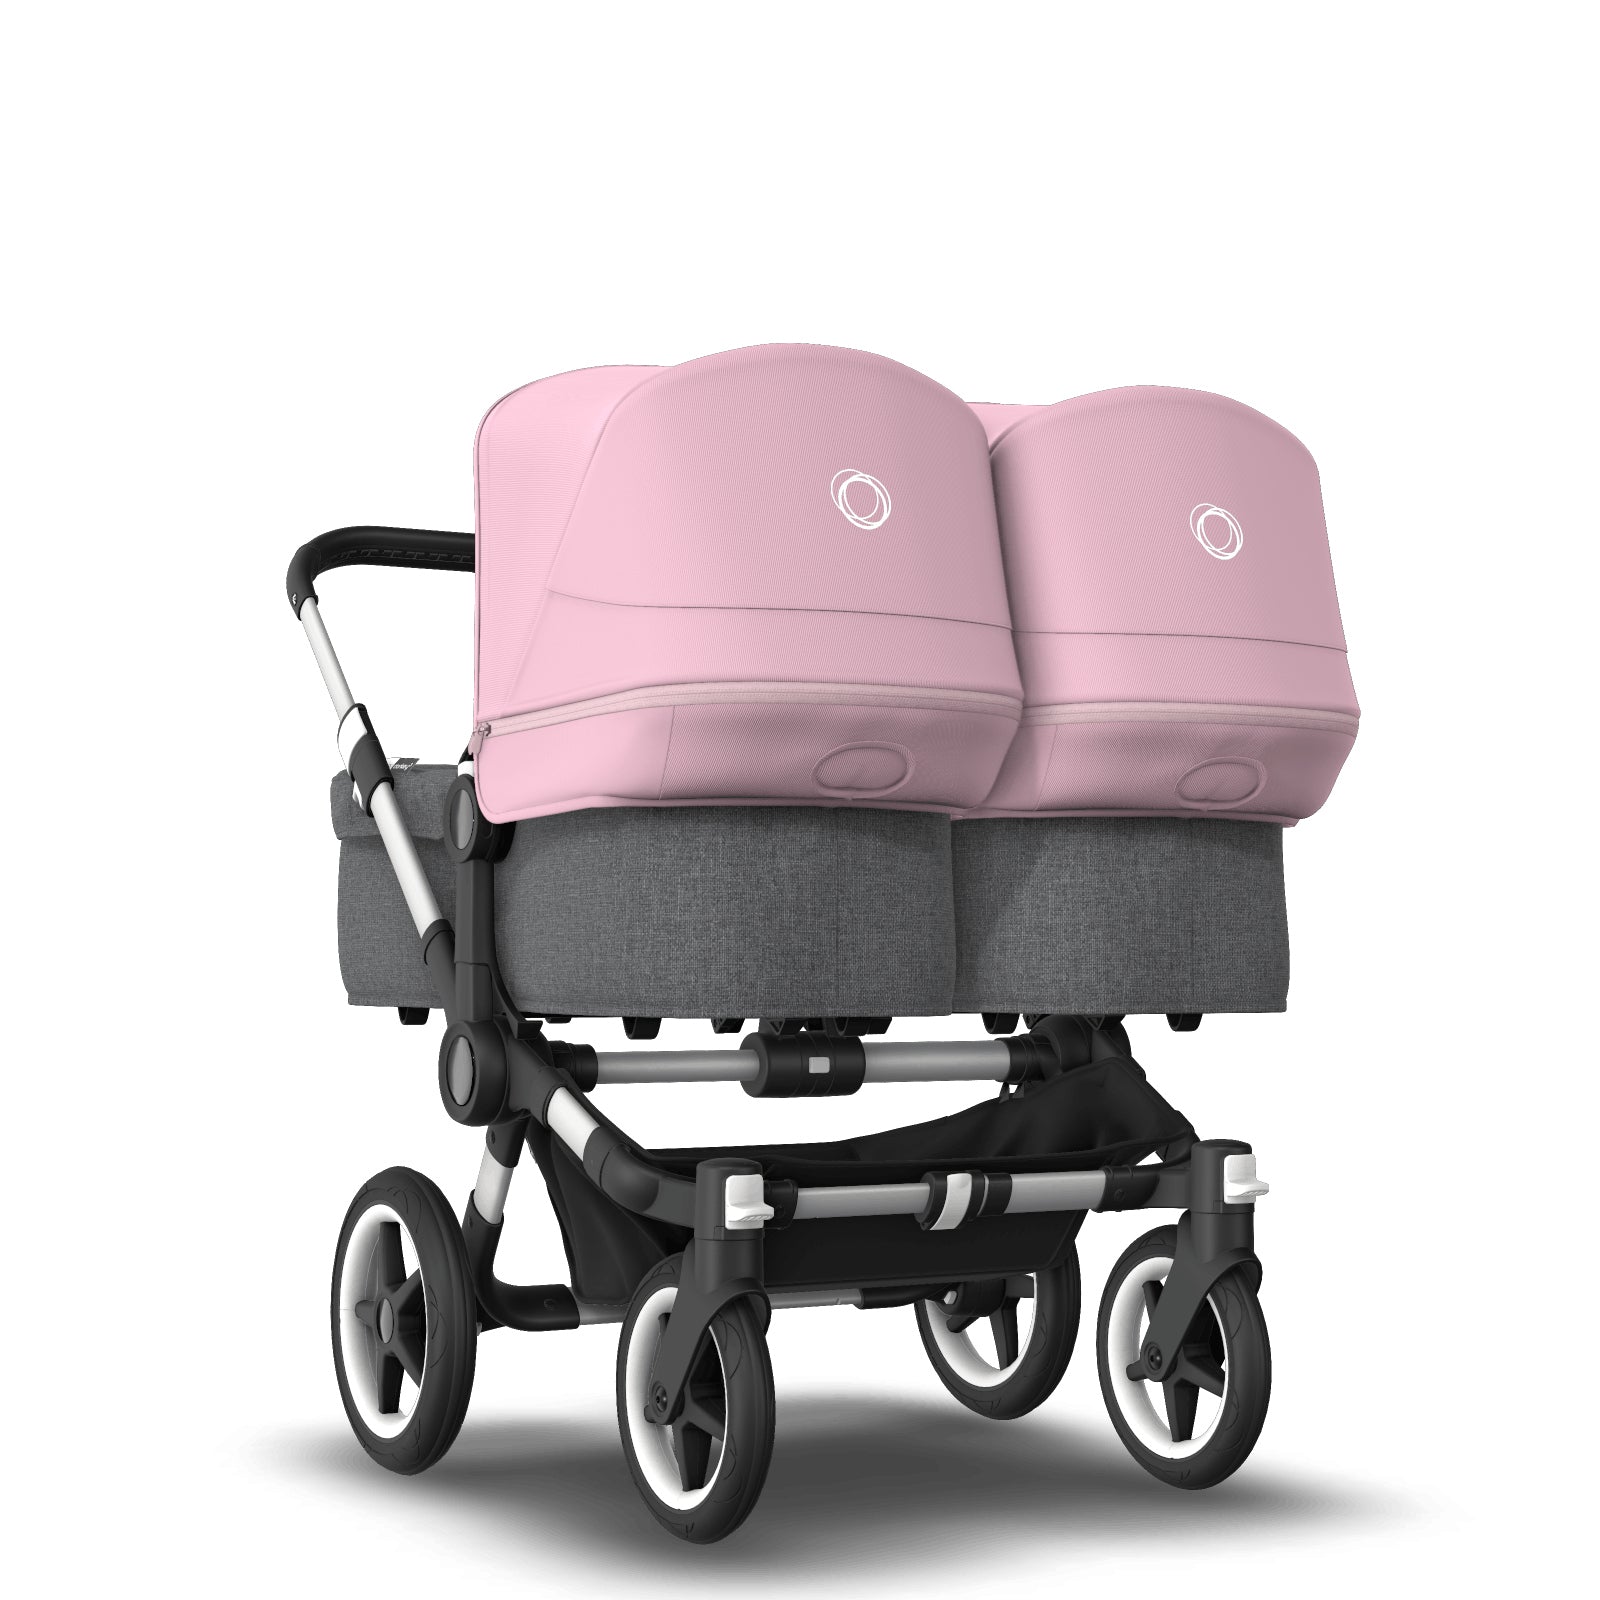 Bugaboo Donkey 3 Twin Seat and Carrycot Pushchair - Soft Pink